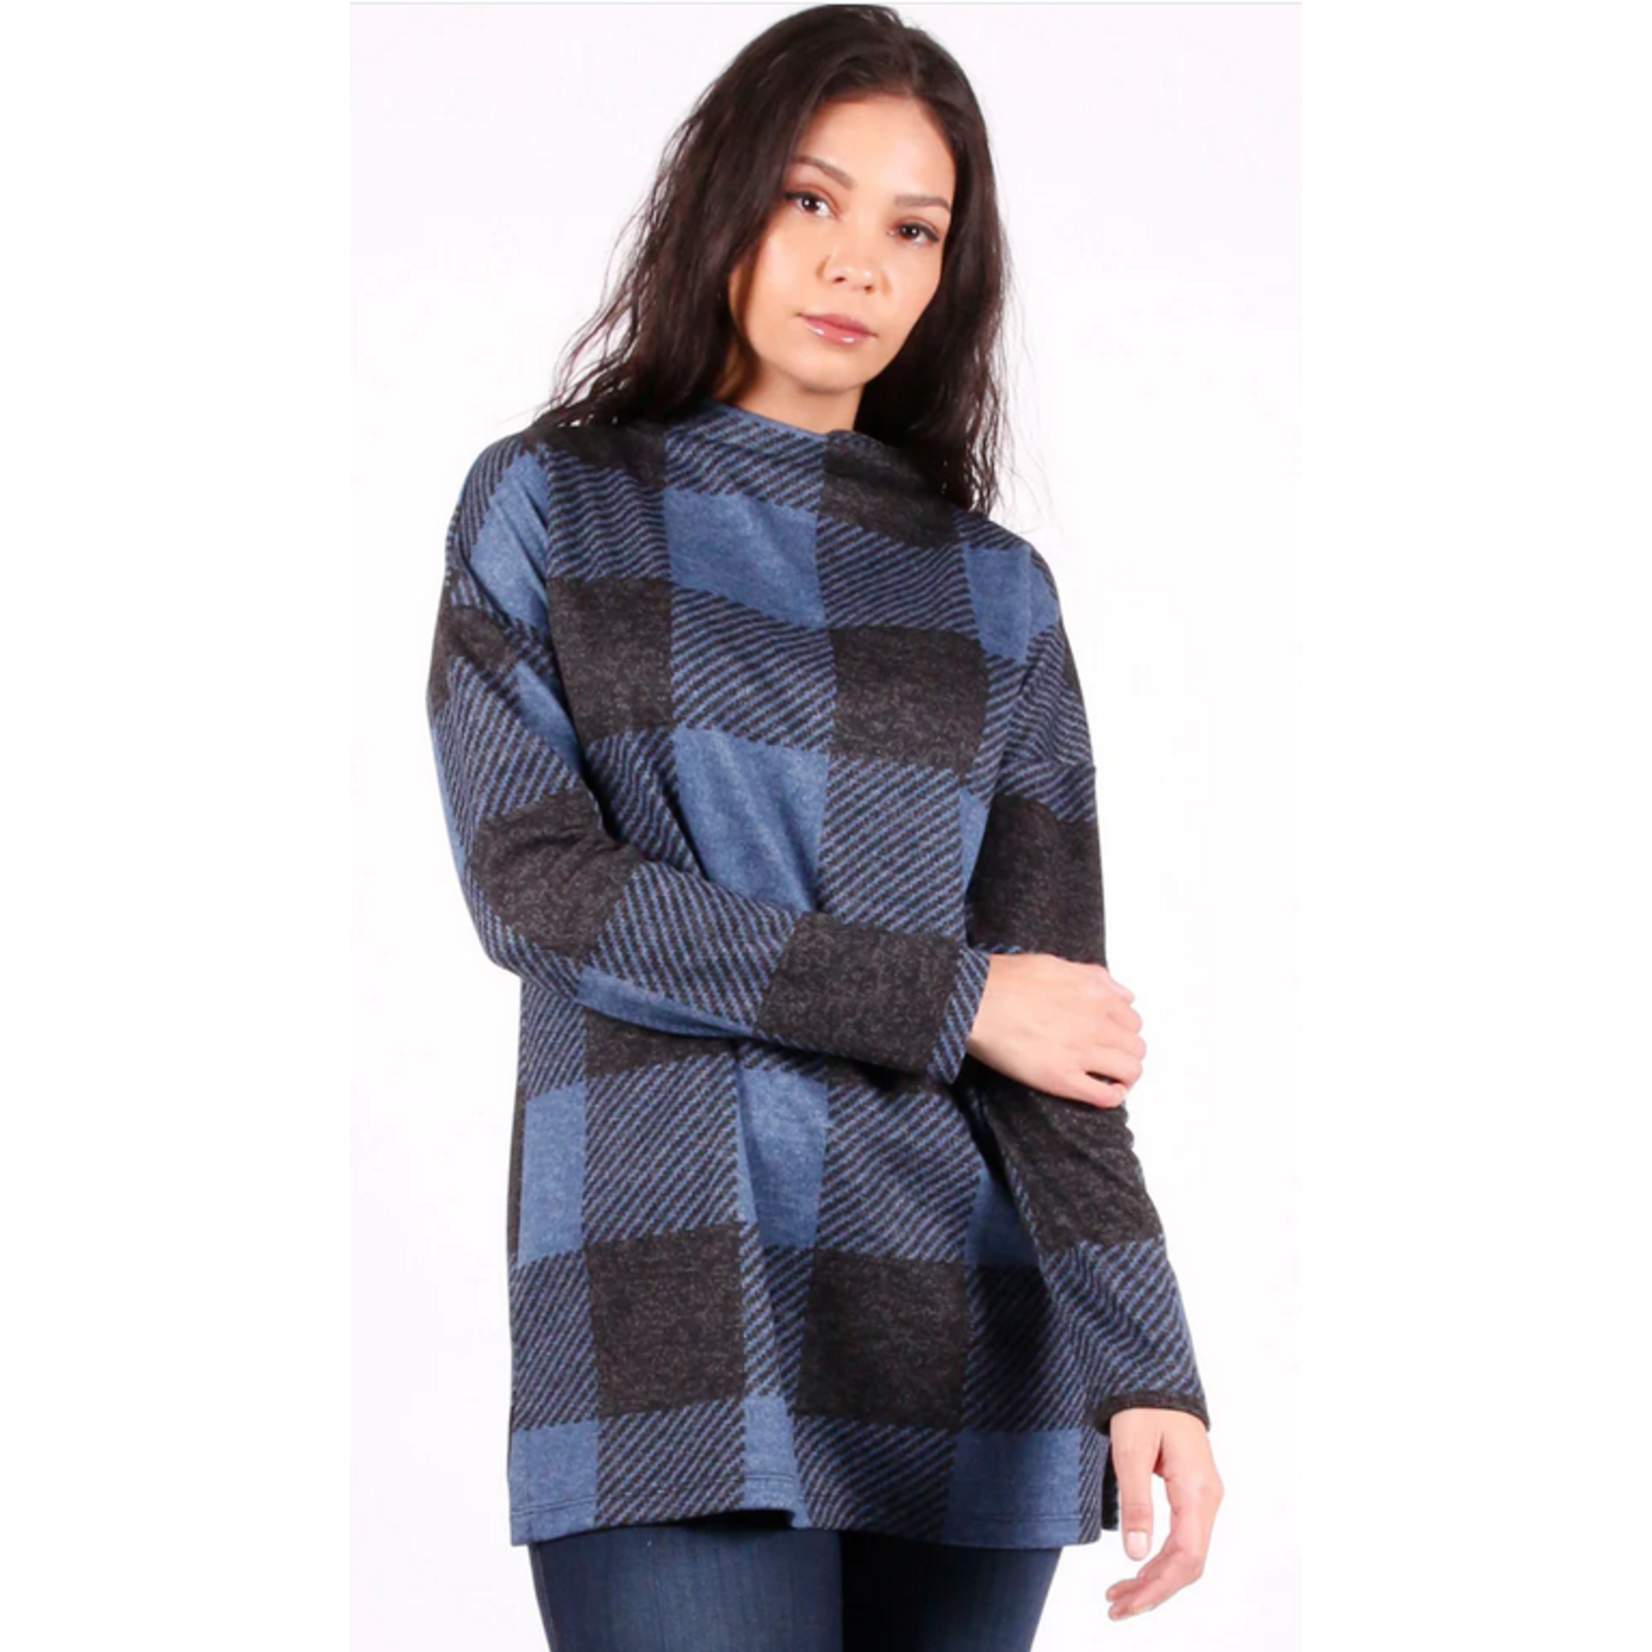 Isca Raised neck long sleeveplaid top with side slits